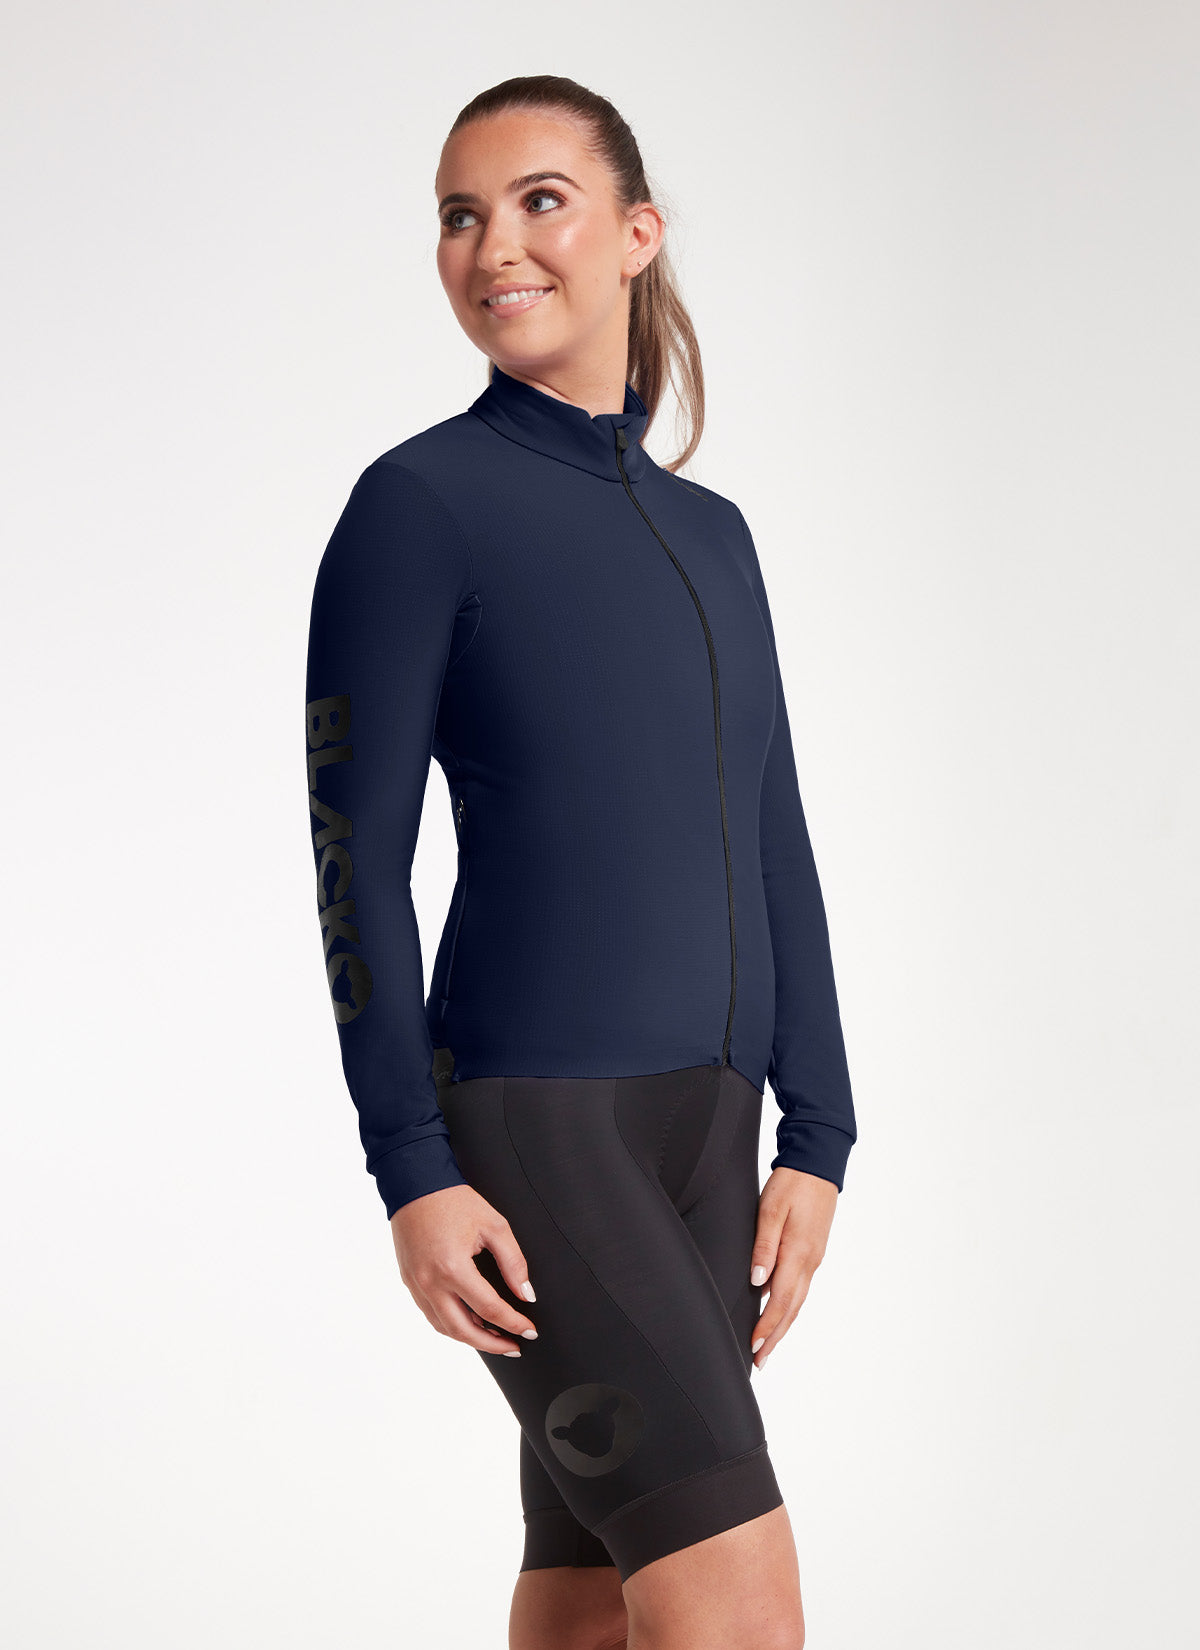 Women's Elements LS Thermal Jersey - Midnight Navy